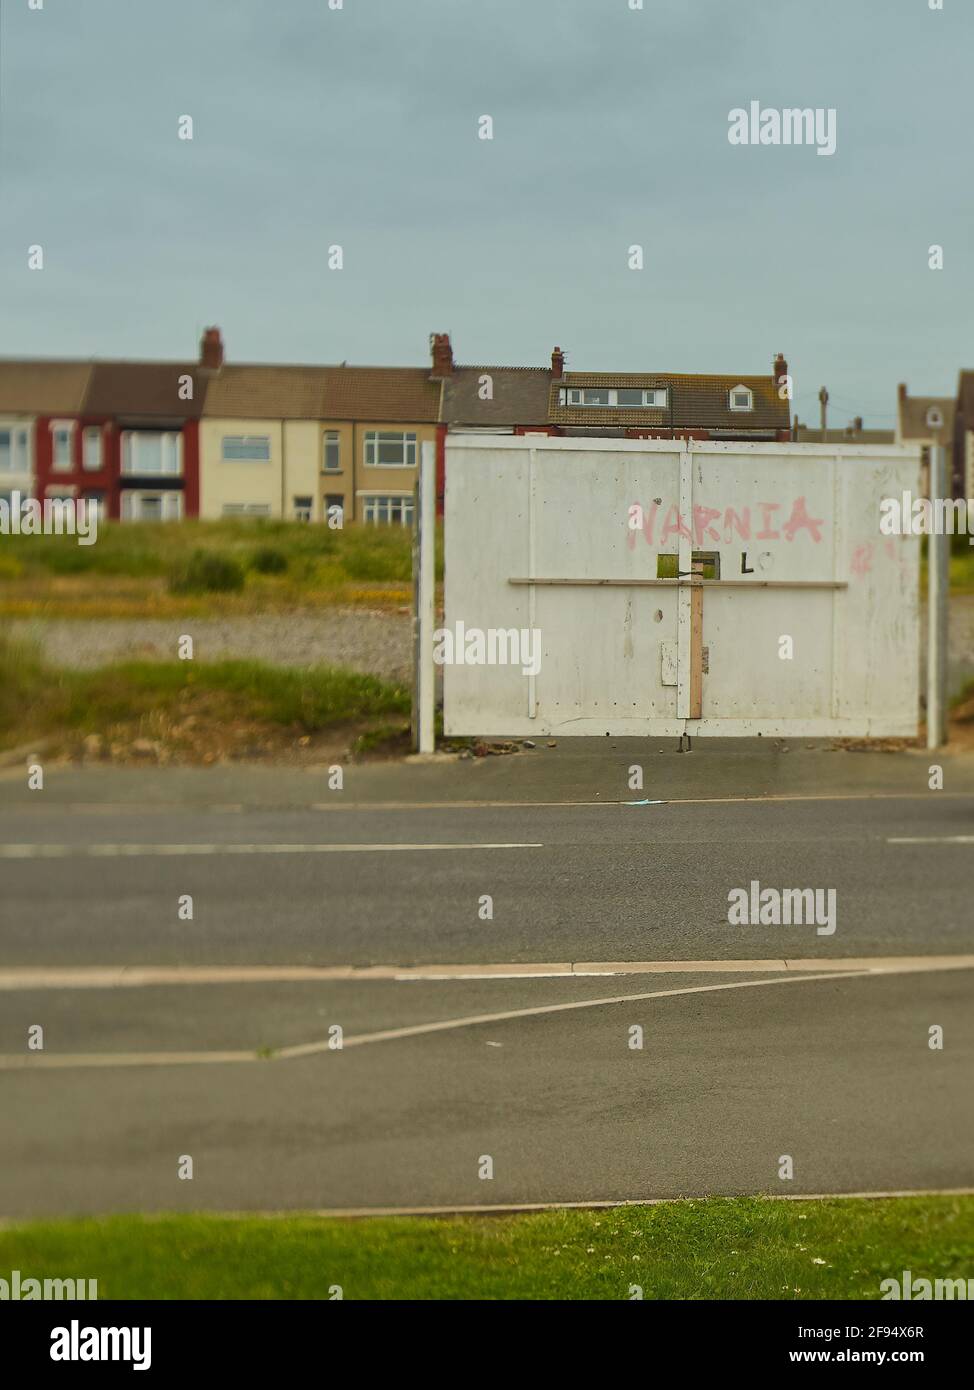 Redcar UK, Jun 2019 - A leisure centre demolished, a failed development and a door to a nowhere wasteland with a slogan fitting the dark local humour Stock Photo